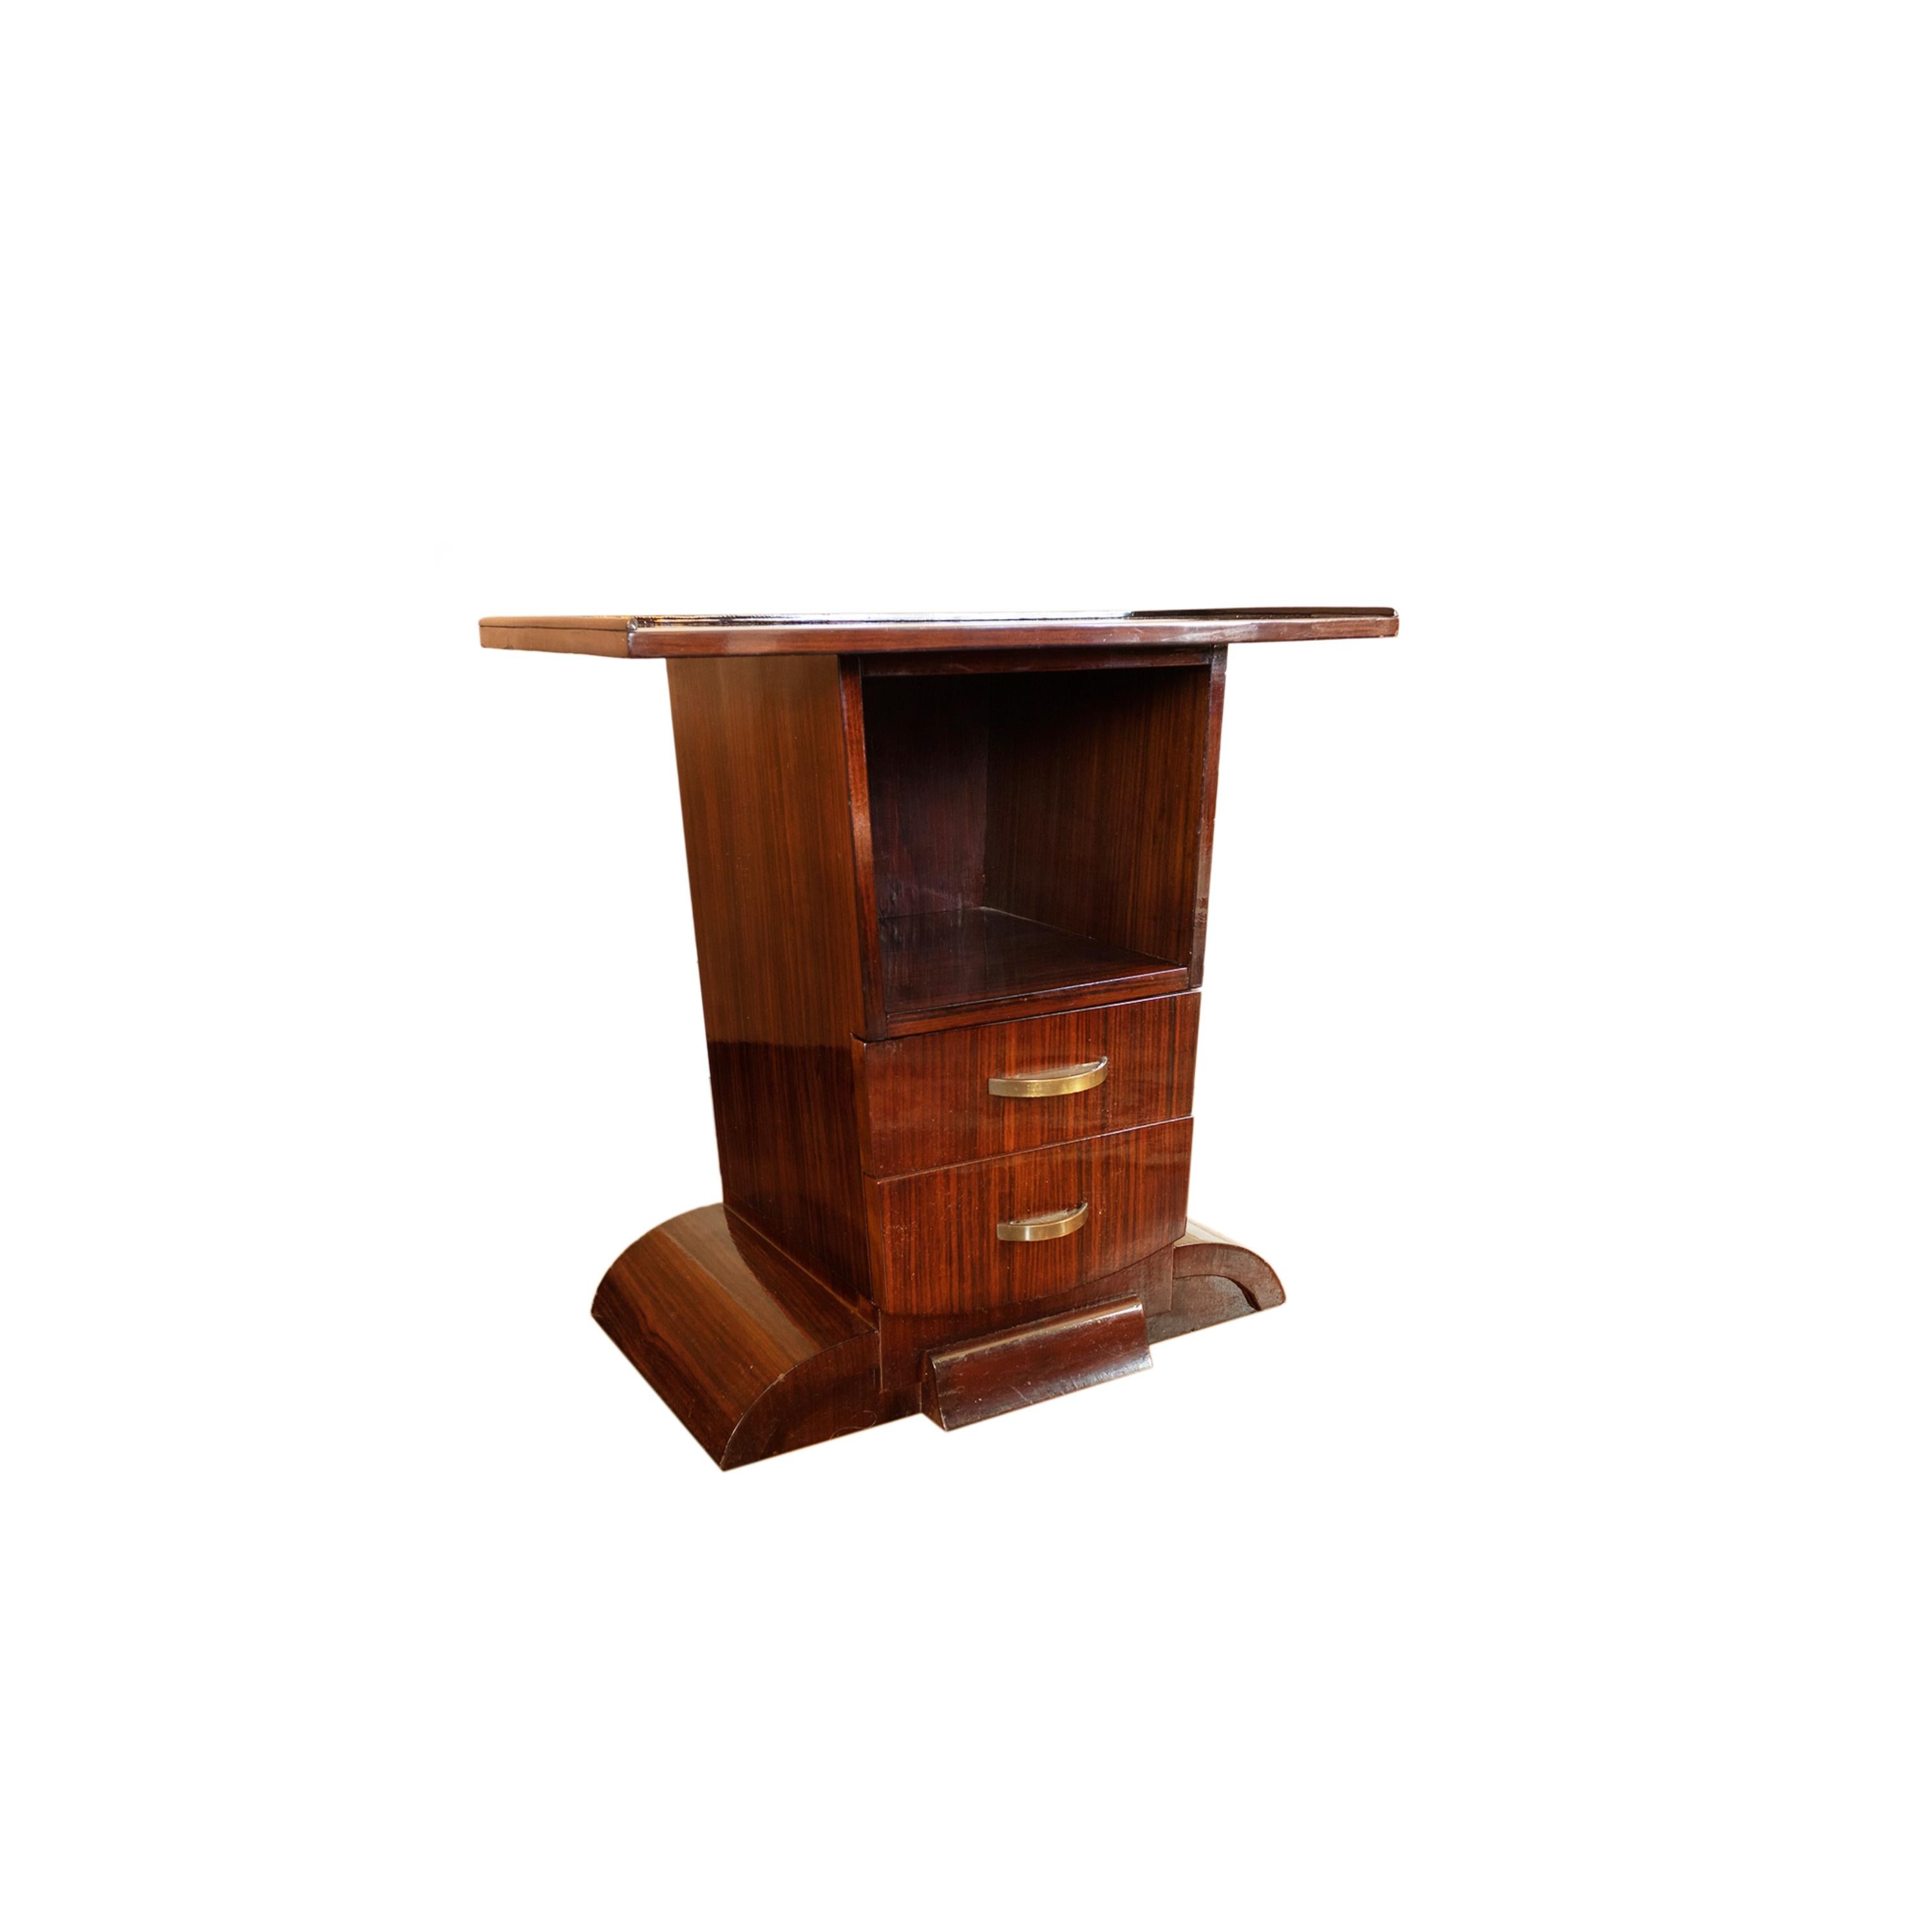 A short walnut nightstand or sofa side table, veneer finished with two drawers with a lower open space. 